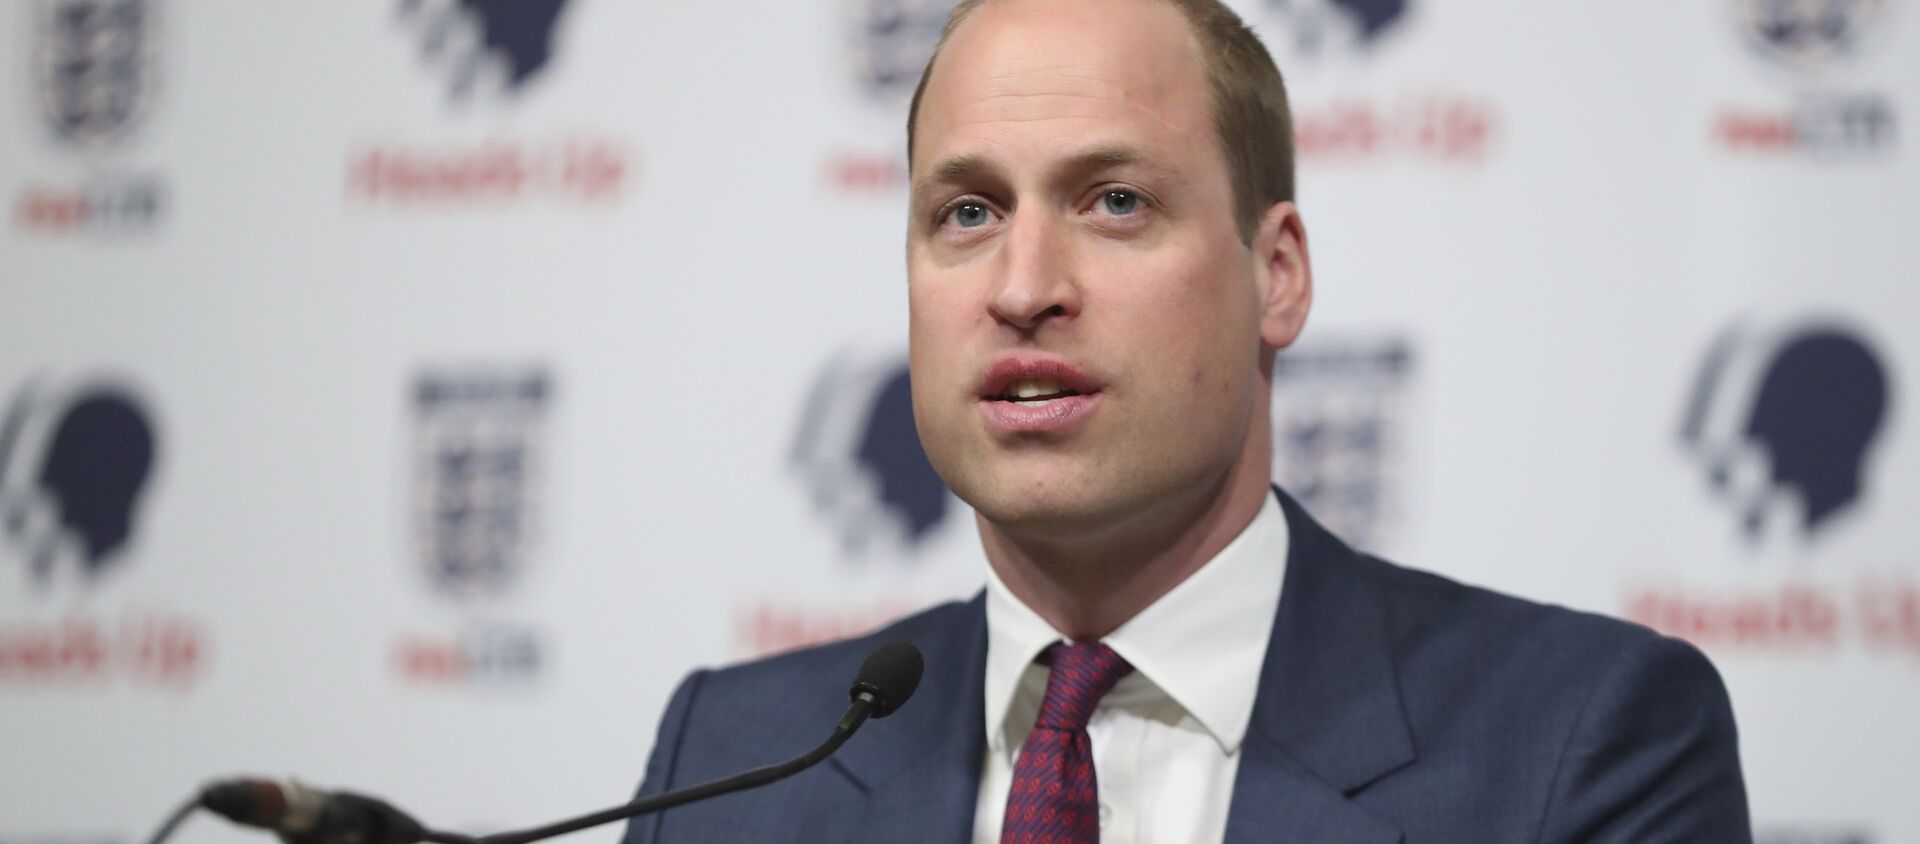 Britain's Prince William, President of the Football Association, right, speaks at the launch of a new mental health campaign at Wembley Stadium, London, 15 May 2019 - Sputnik International, 1920, 22.03.2021